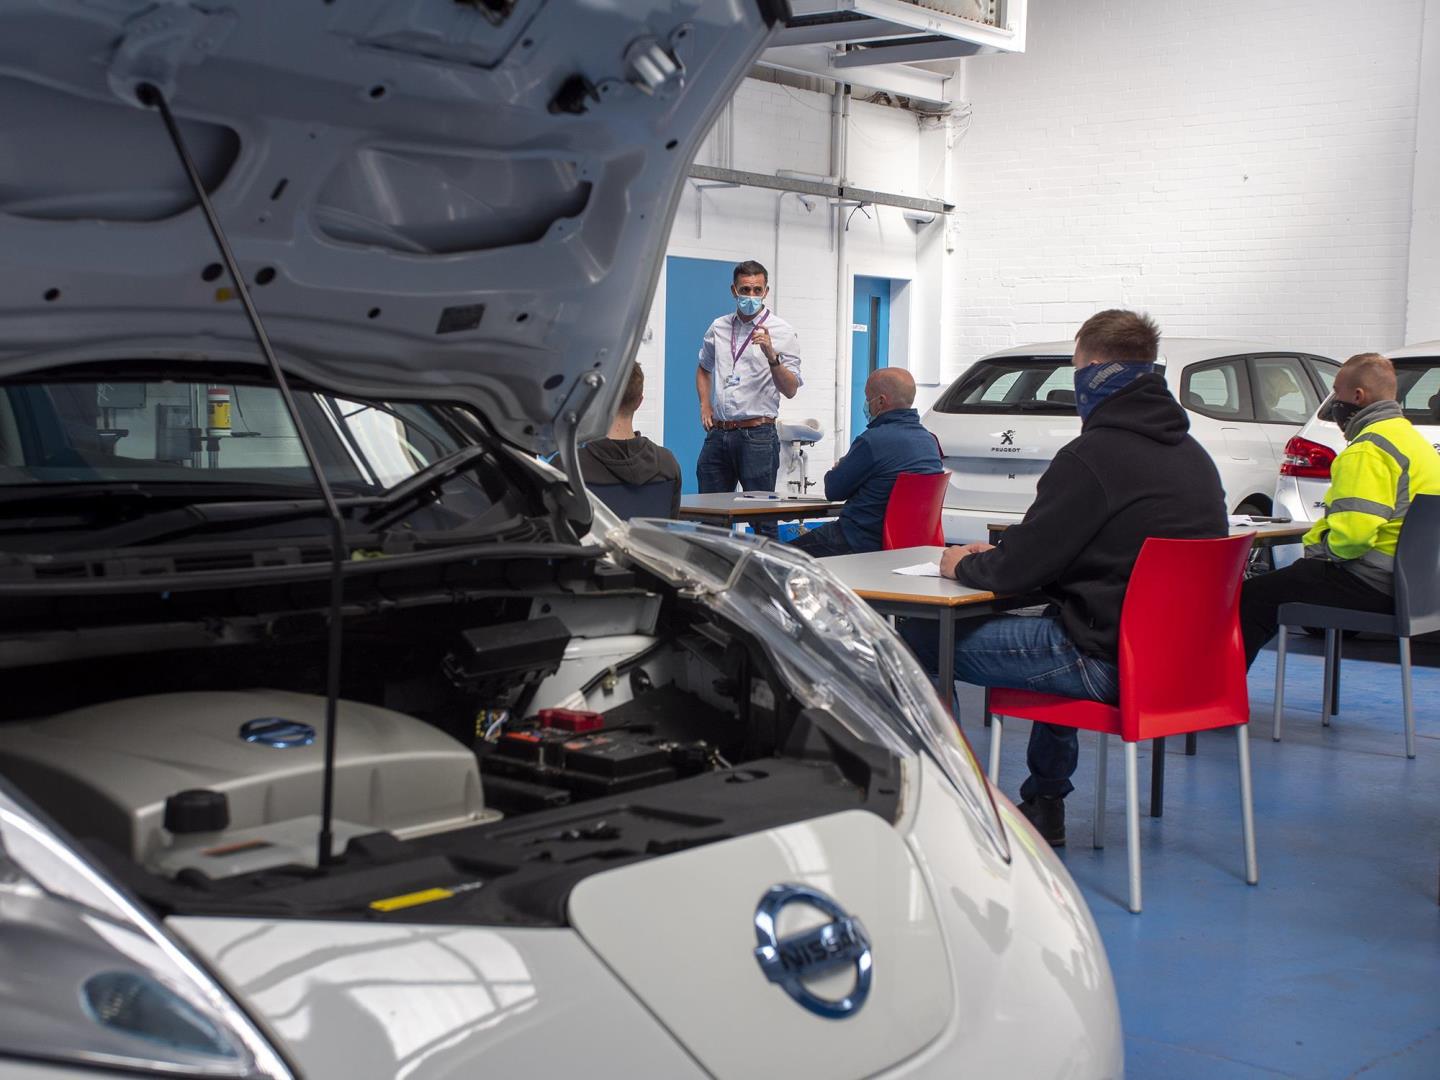 Students undertaking electric vehicle training at Dundee College